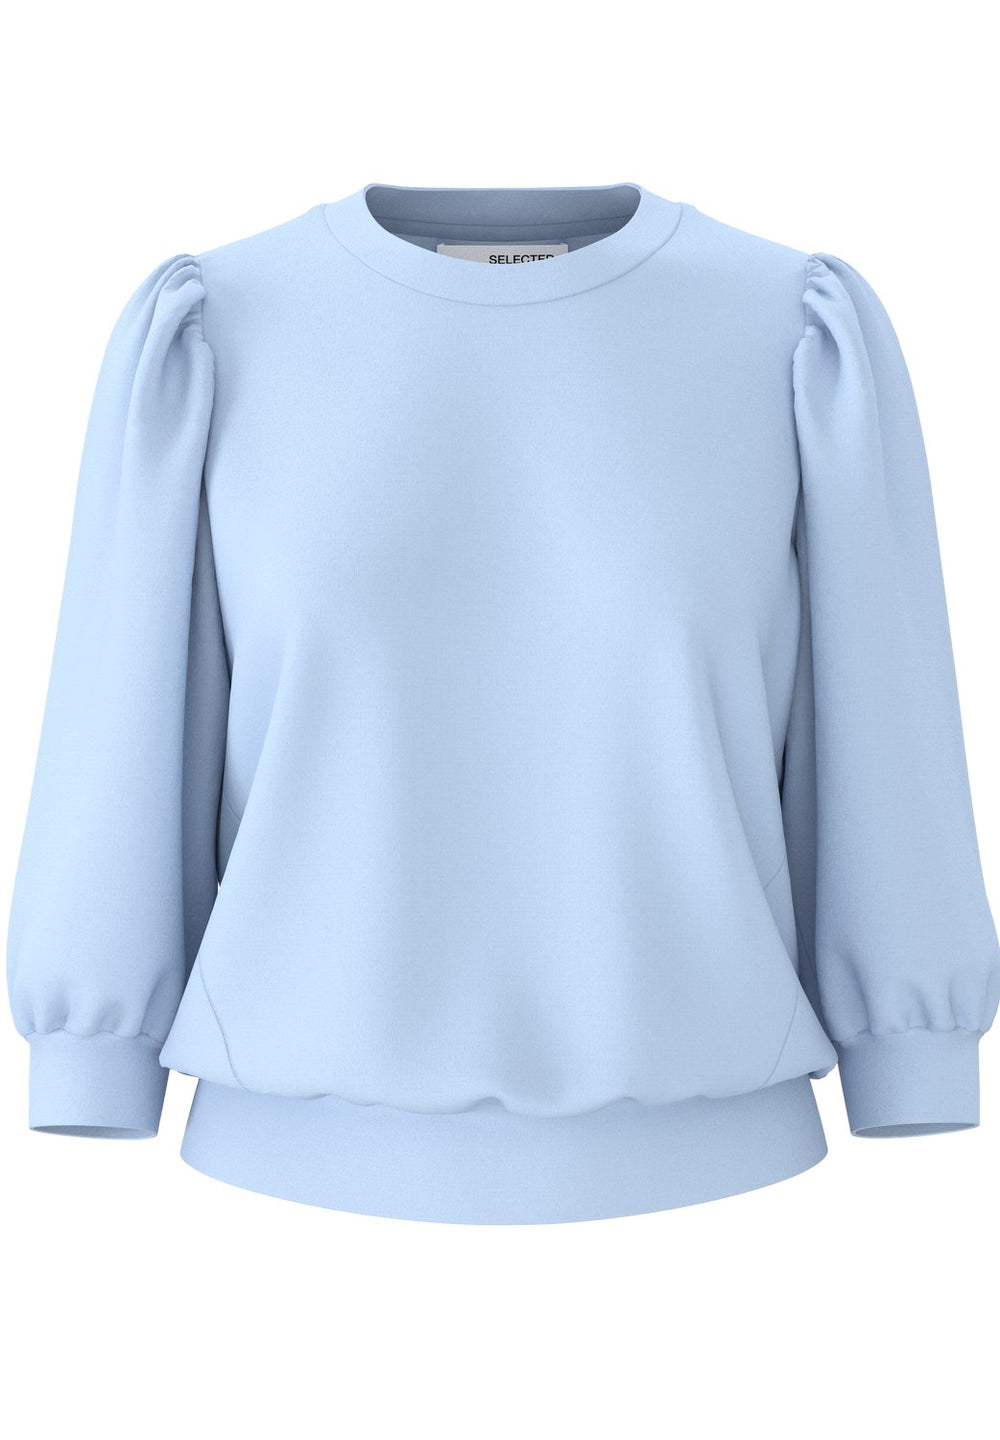 Selected Femme | Bluse | Tenny 3/4 Sweat Top, Cashmere Blue